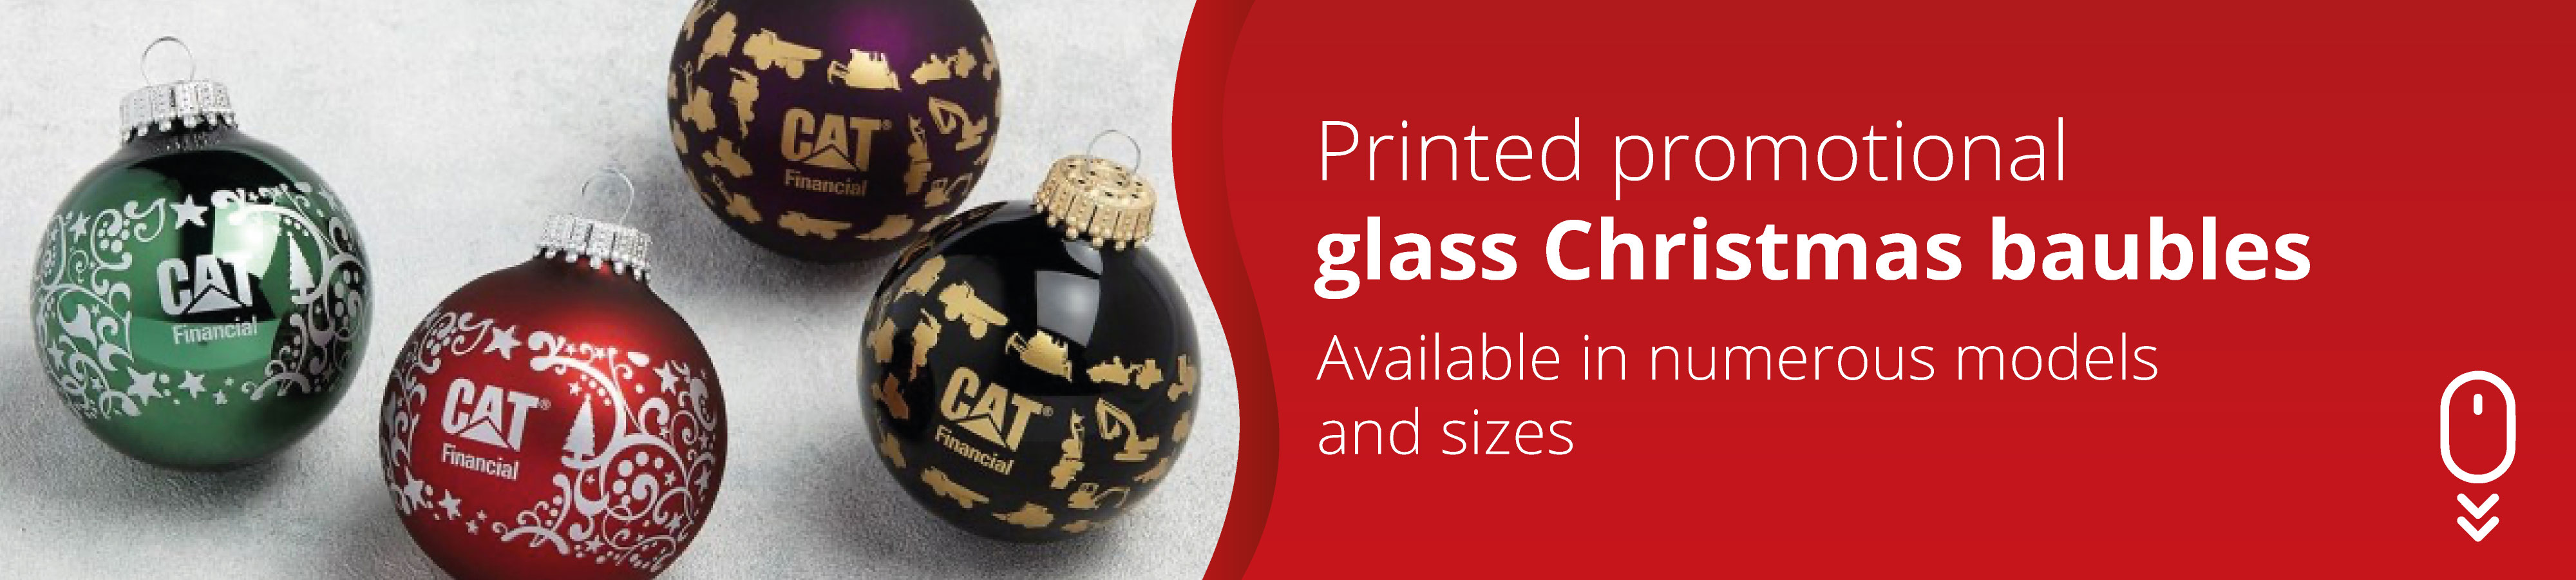 Printed-promotional-glass-Christmas-baublesZ6AINrkMcpbB3